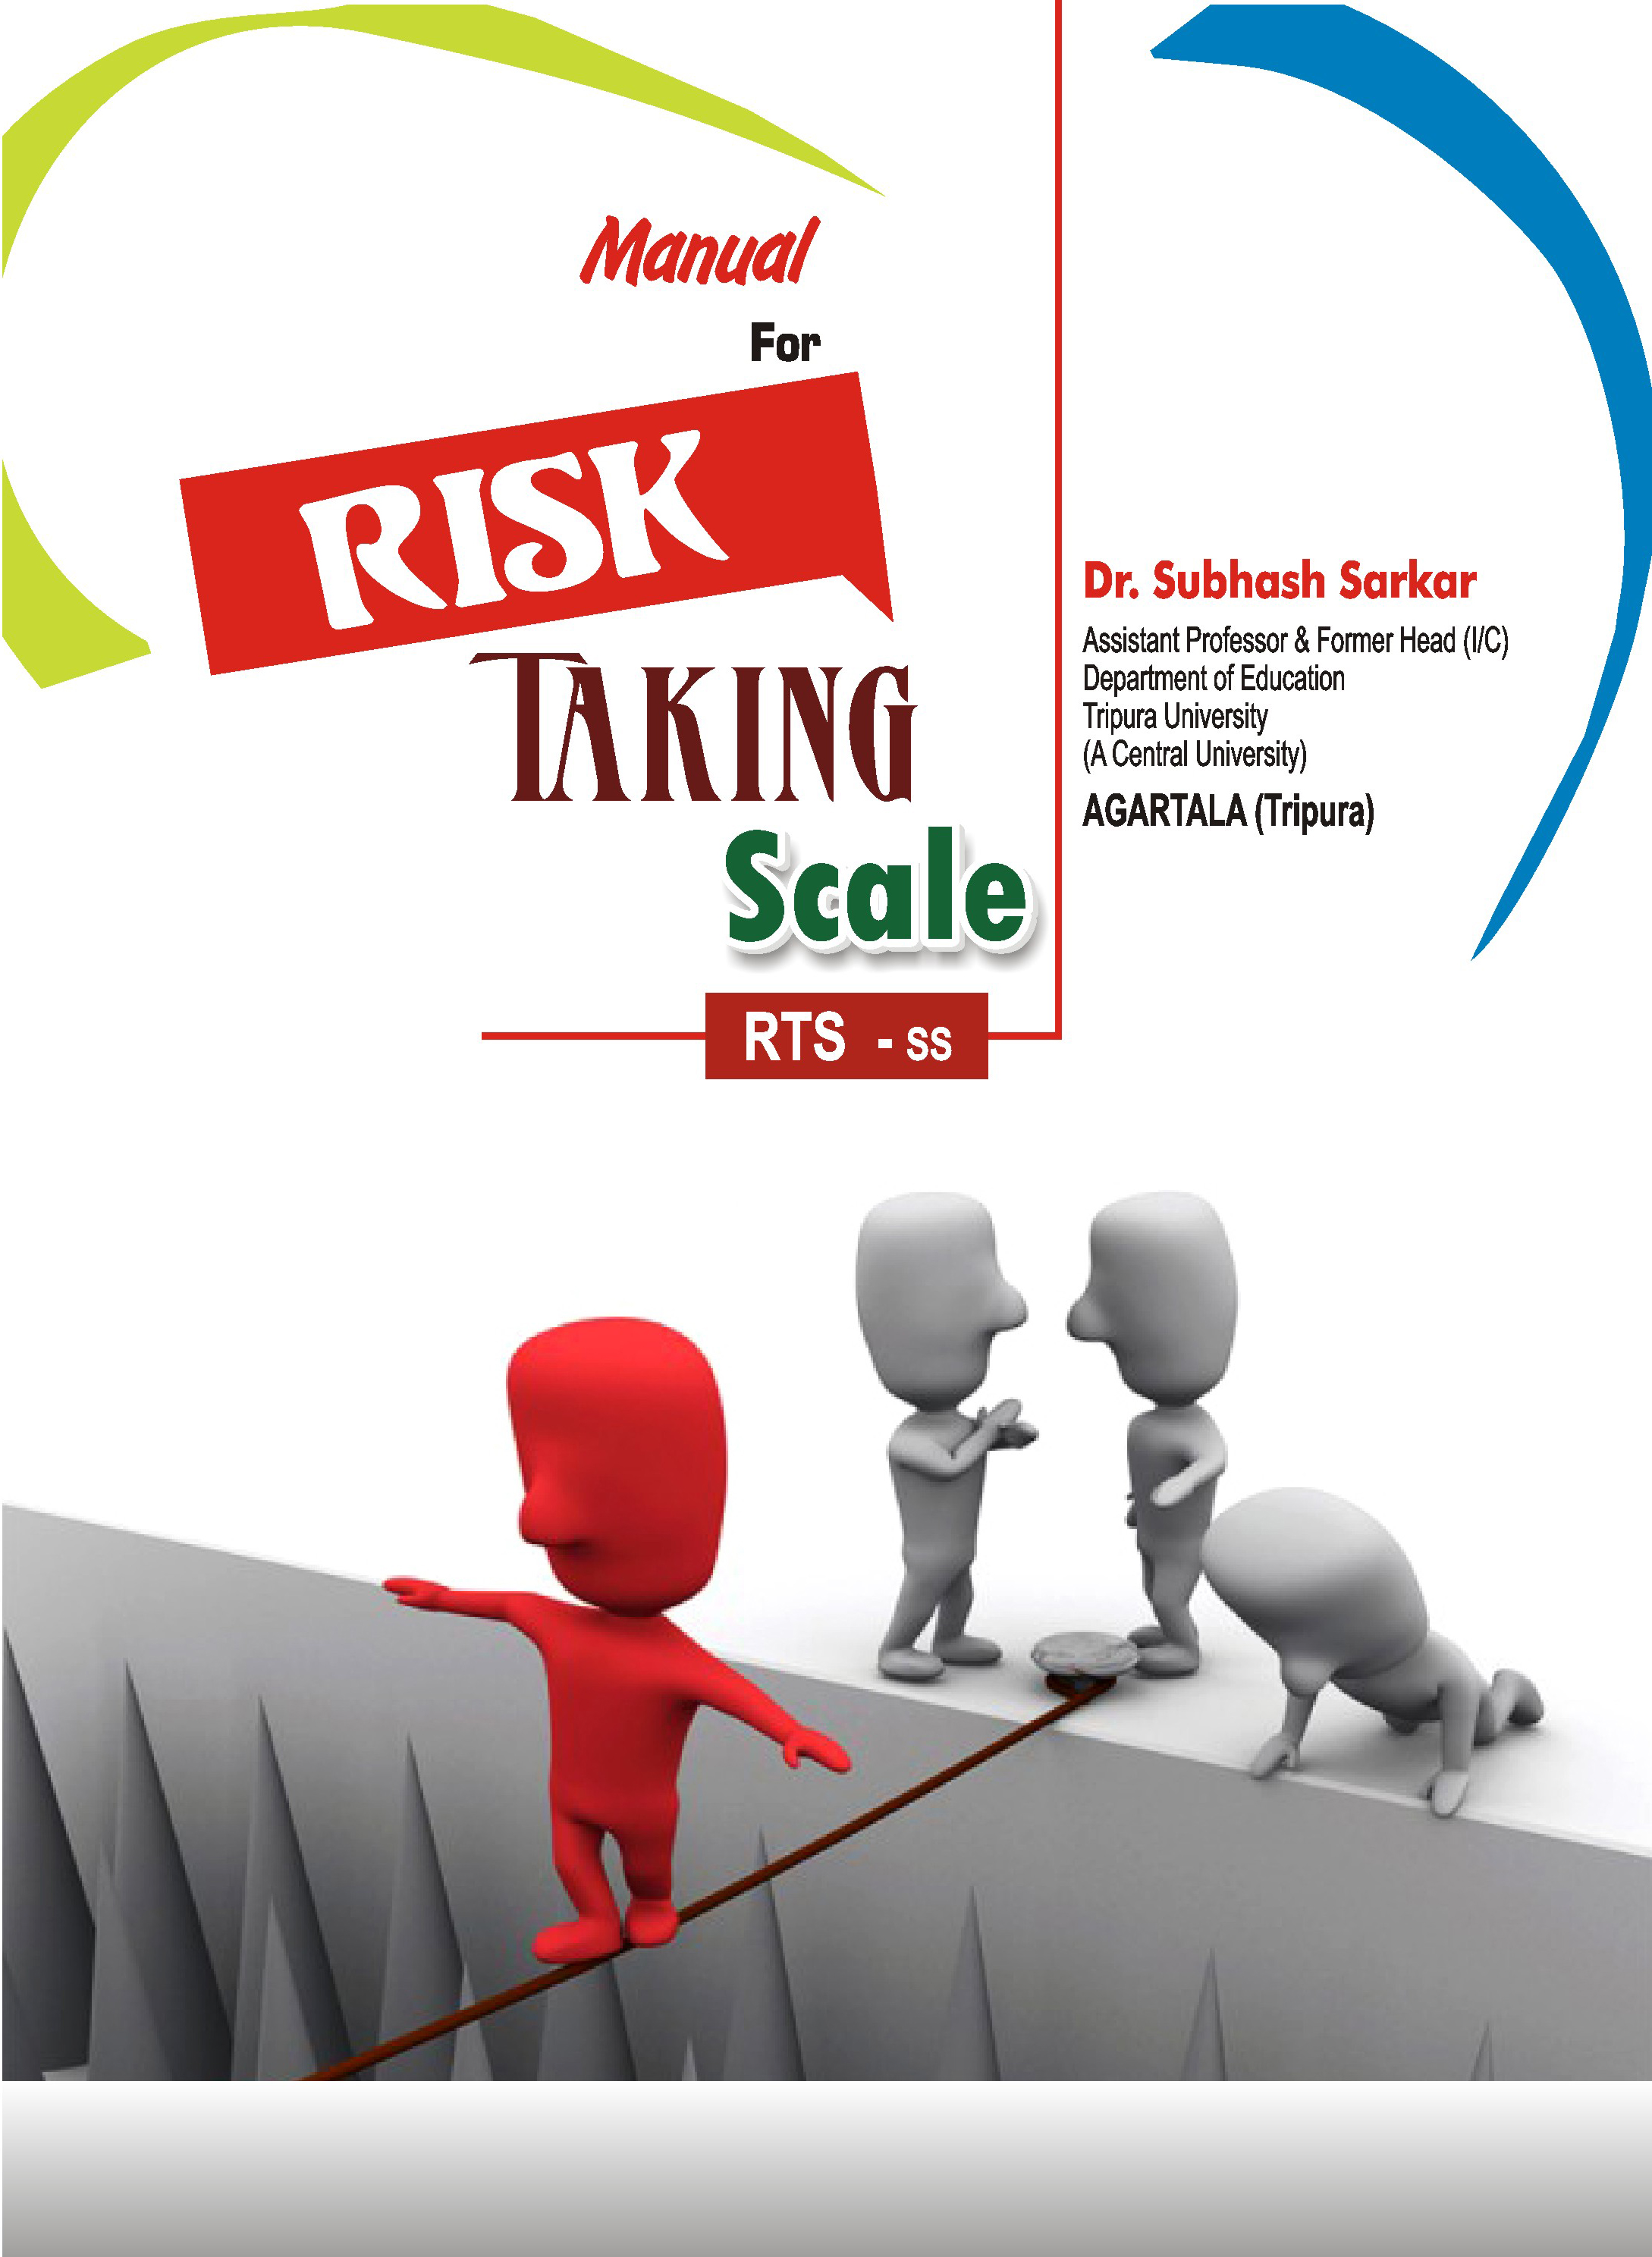 RISK-TAKING-SCALE